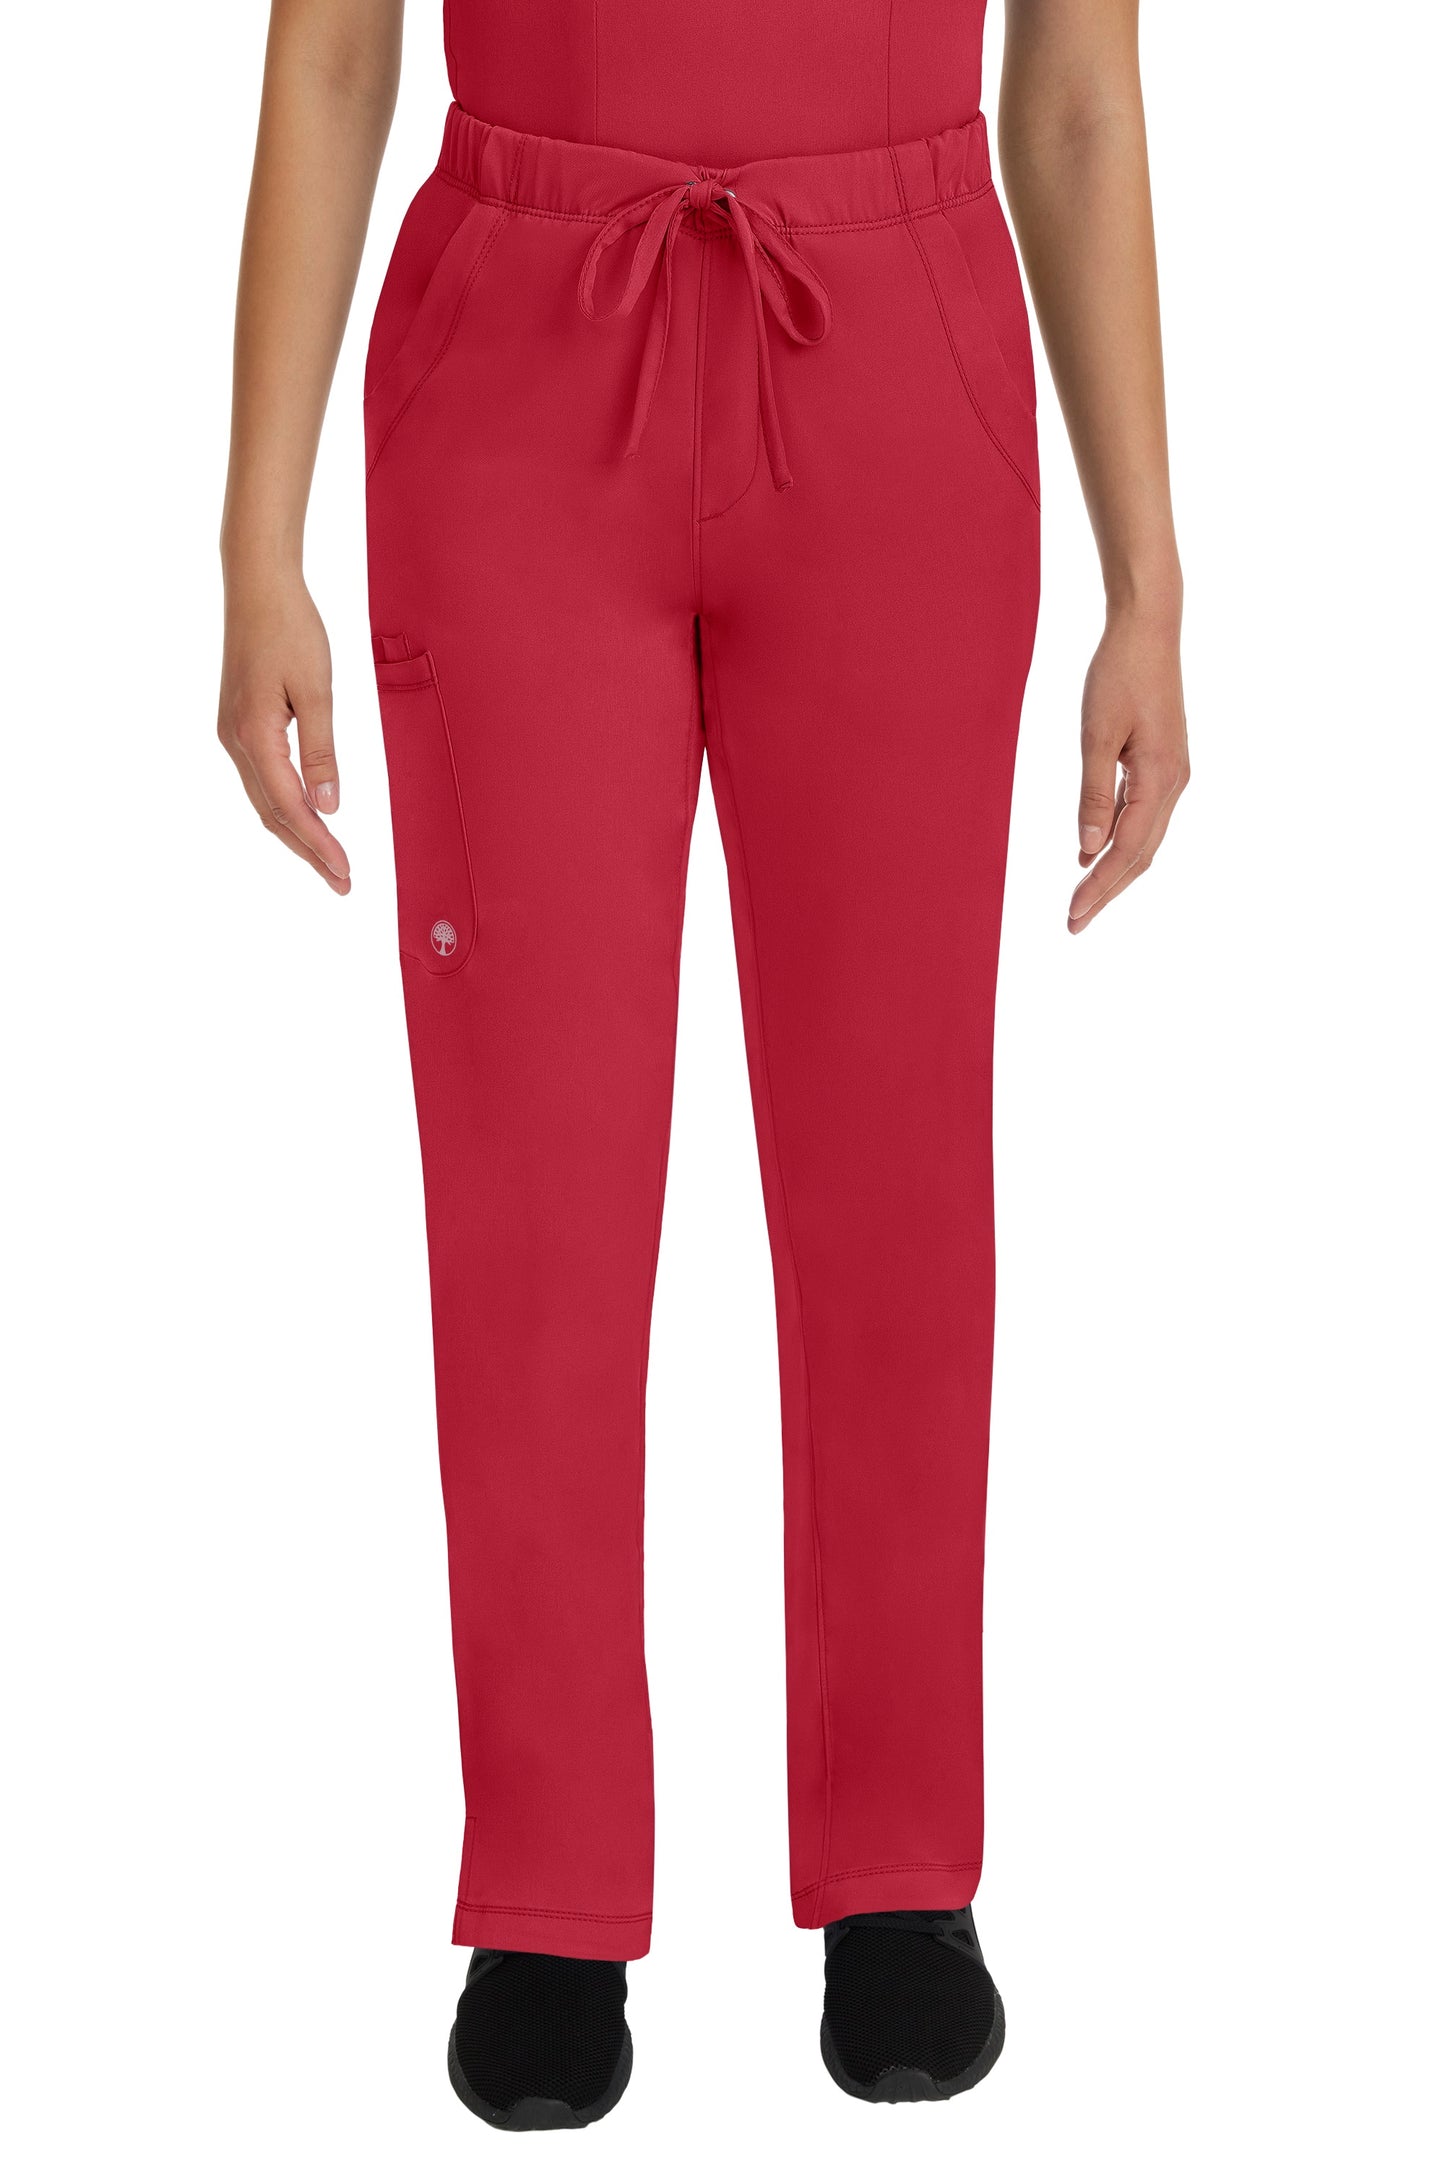 Healing Hands Scrubs HH Works Rebecca Petite Scrub Pant in Red at Parker's Clothing and Shoes.